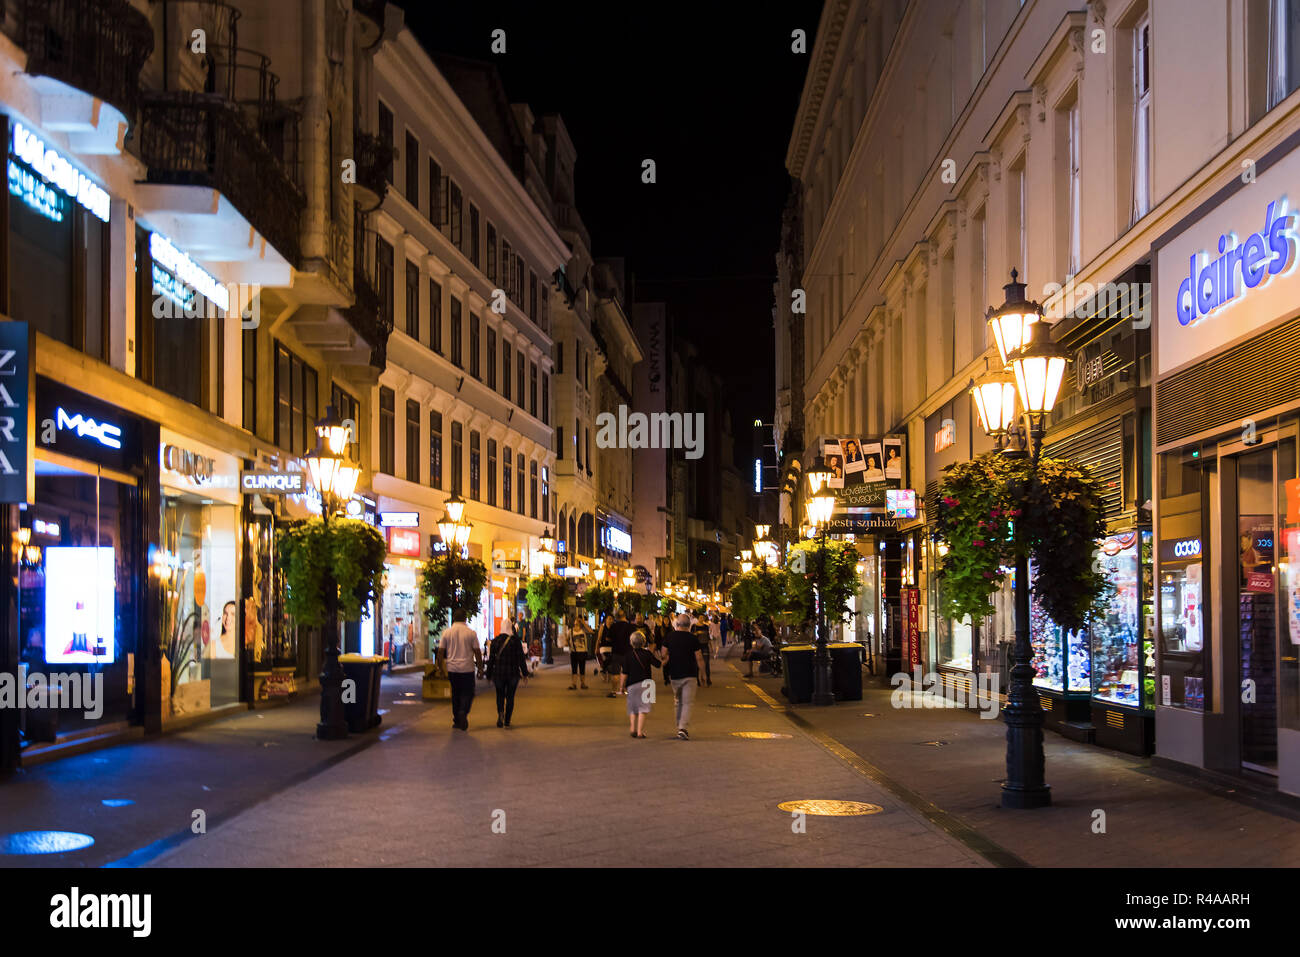 Budapest, Hungary - August 16, 2018: Downtown Budapest pedestrian walking area with many people exploring the city by night Stock Photo